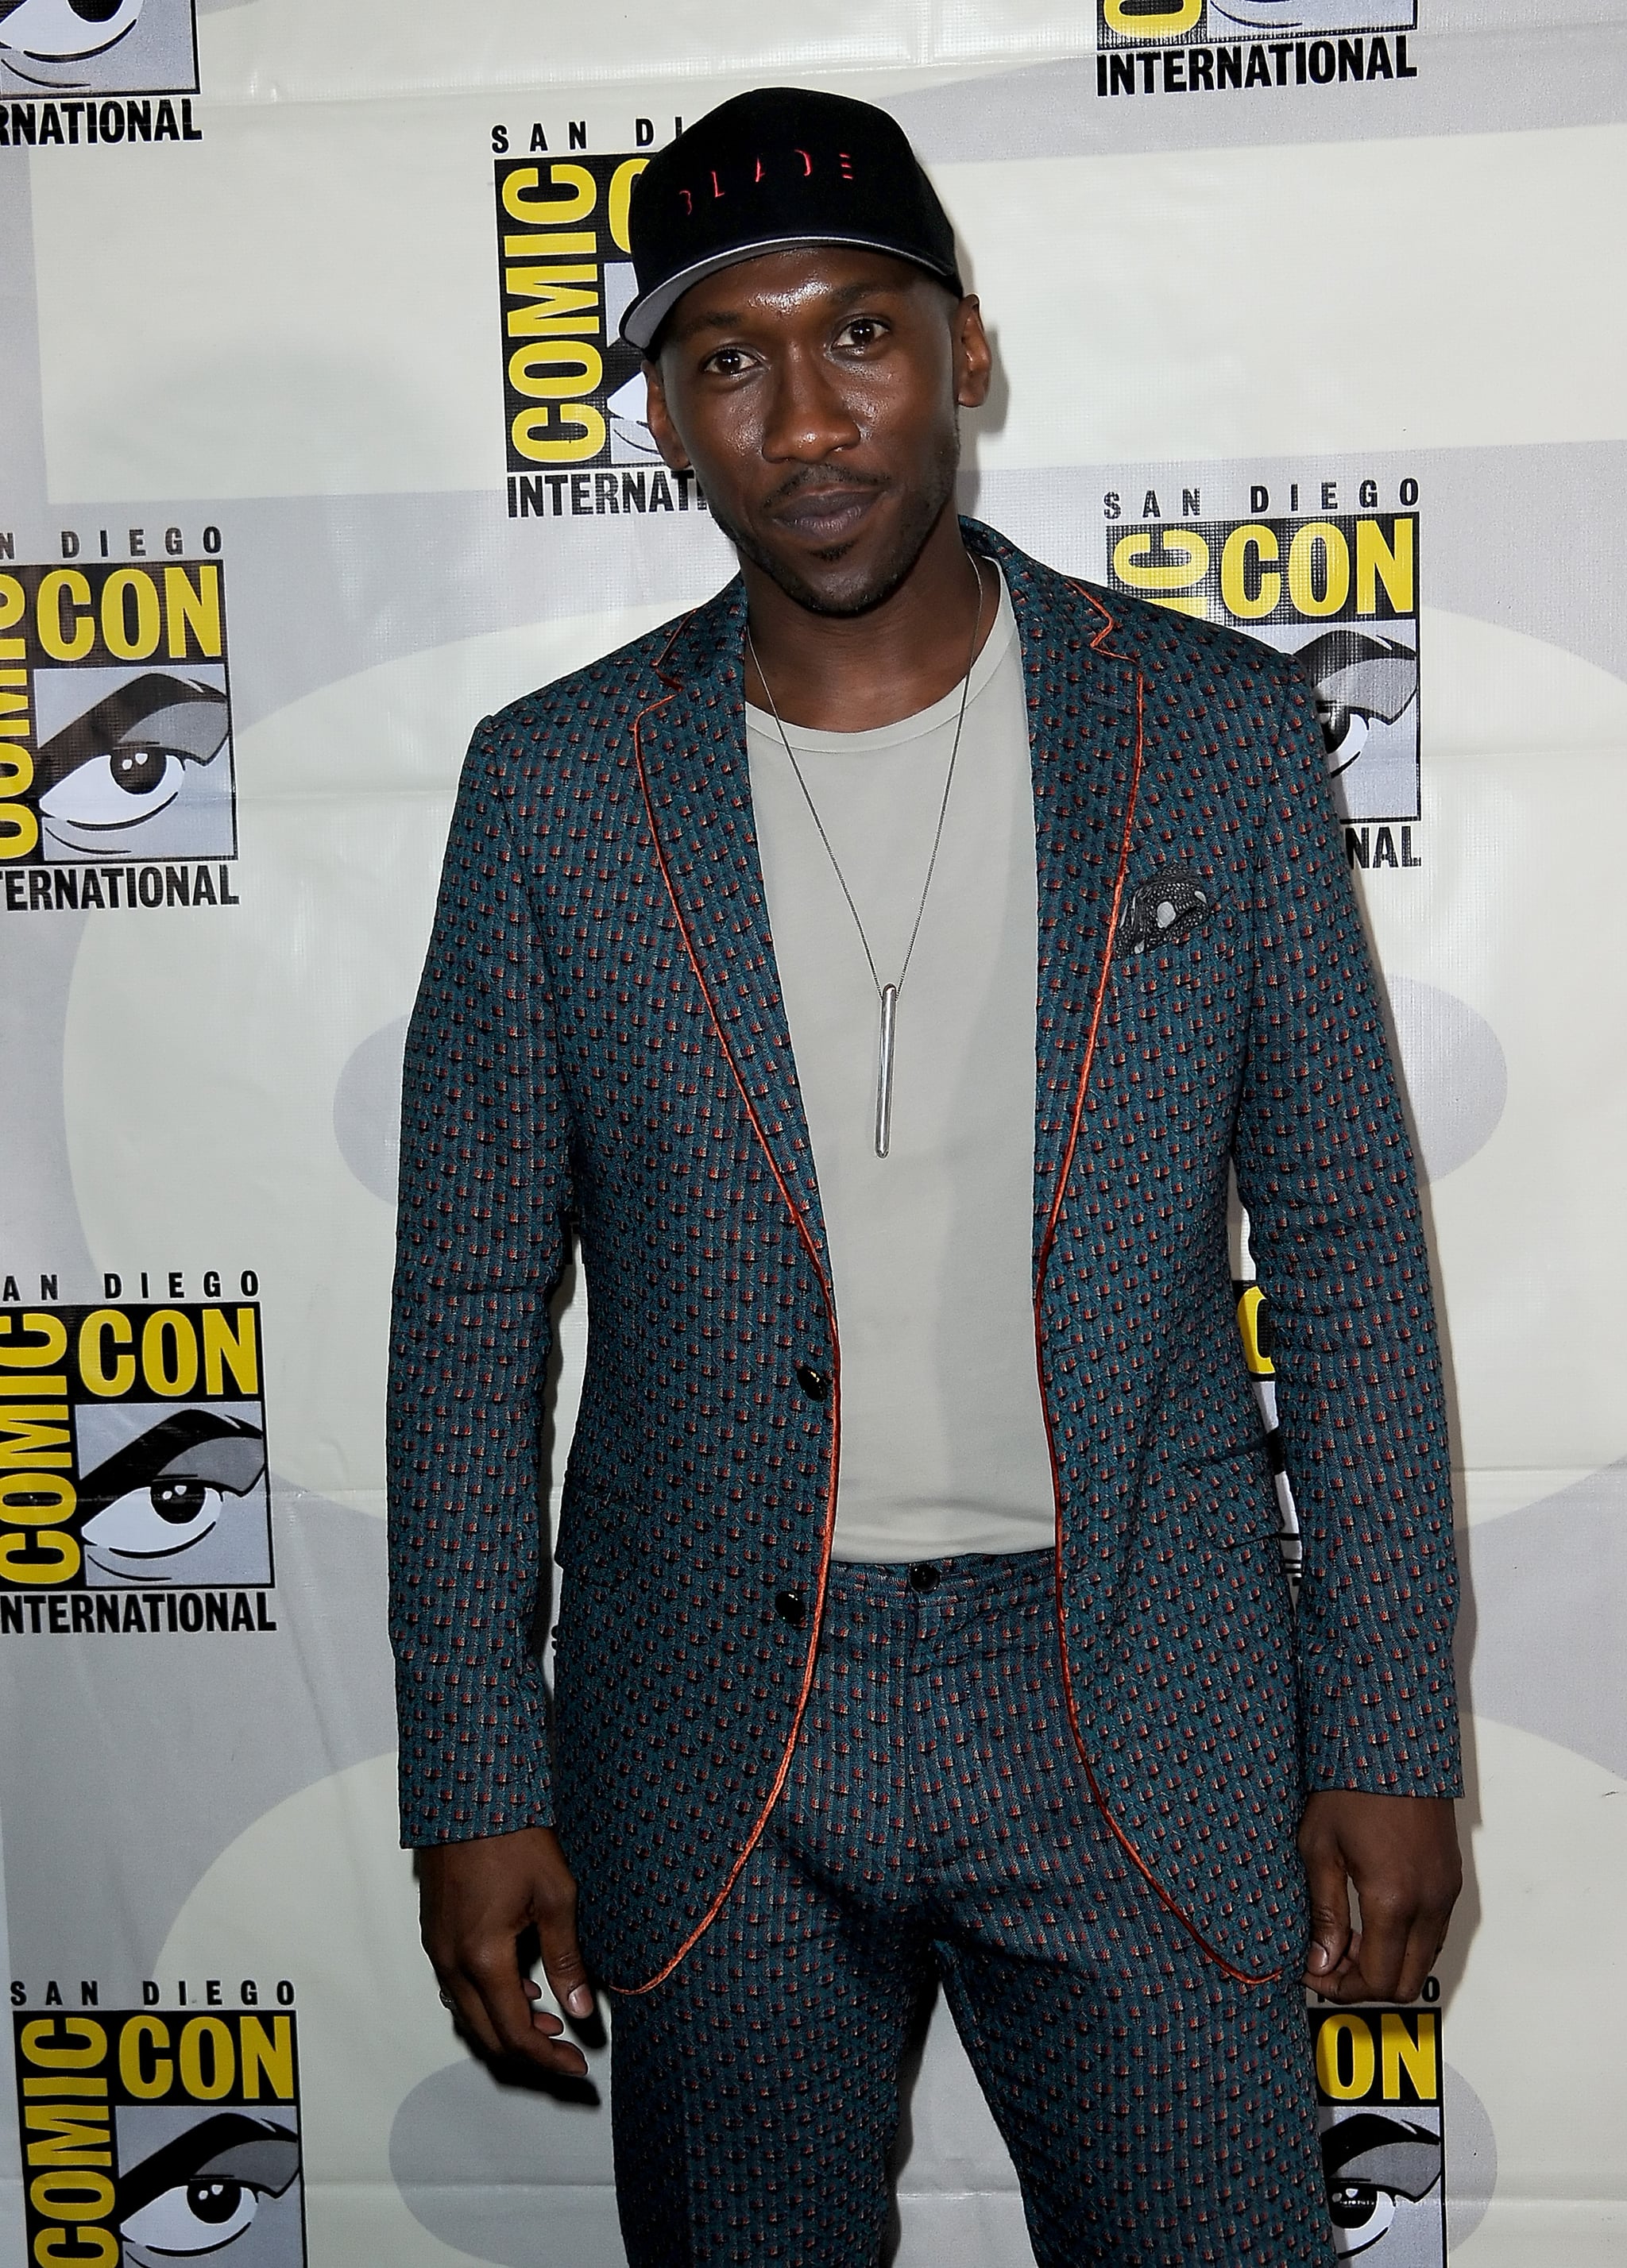 SAN DIEGO, CALIFORNIA - JULY 20: Mahershala Ali attends the Marvel Studios Panel during 2019 Comic-Con International at San Diego Convention Center on July 20, 2019 in San Diego, California. (Photo by Albert L. Ortega/Getty Images)